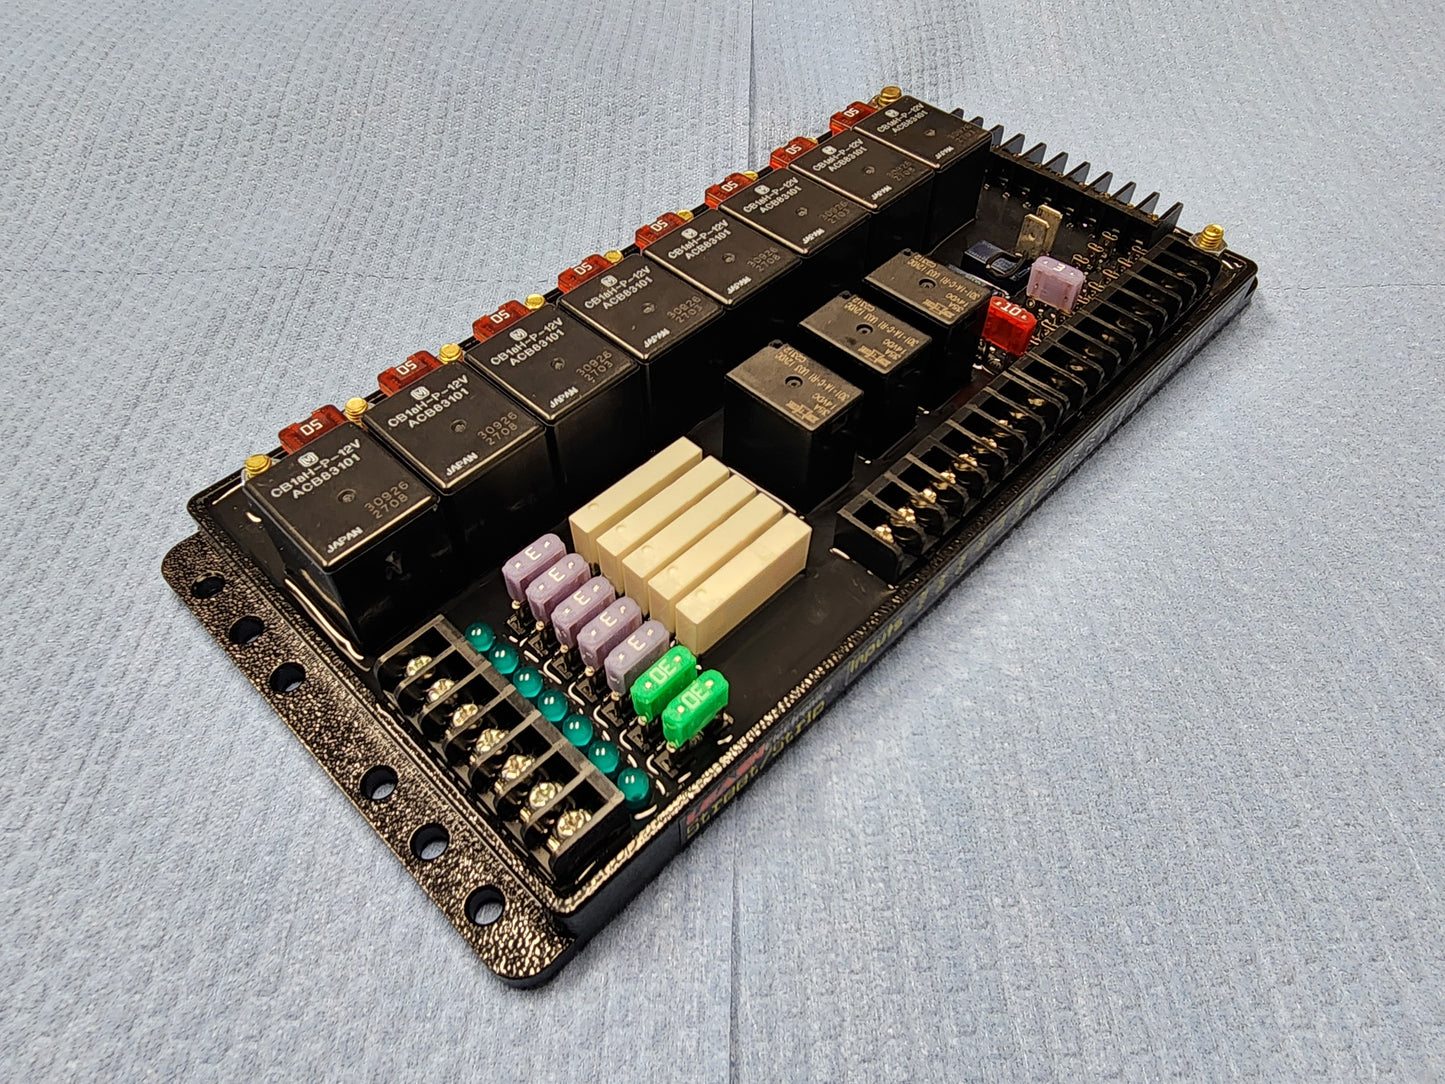 Street/Strip Relay Module with the Pro Street Switch Panel